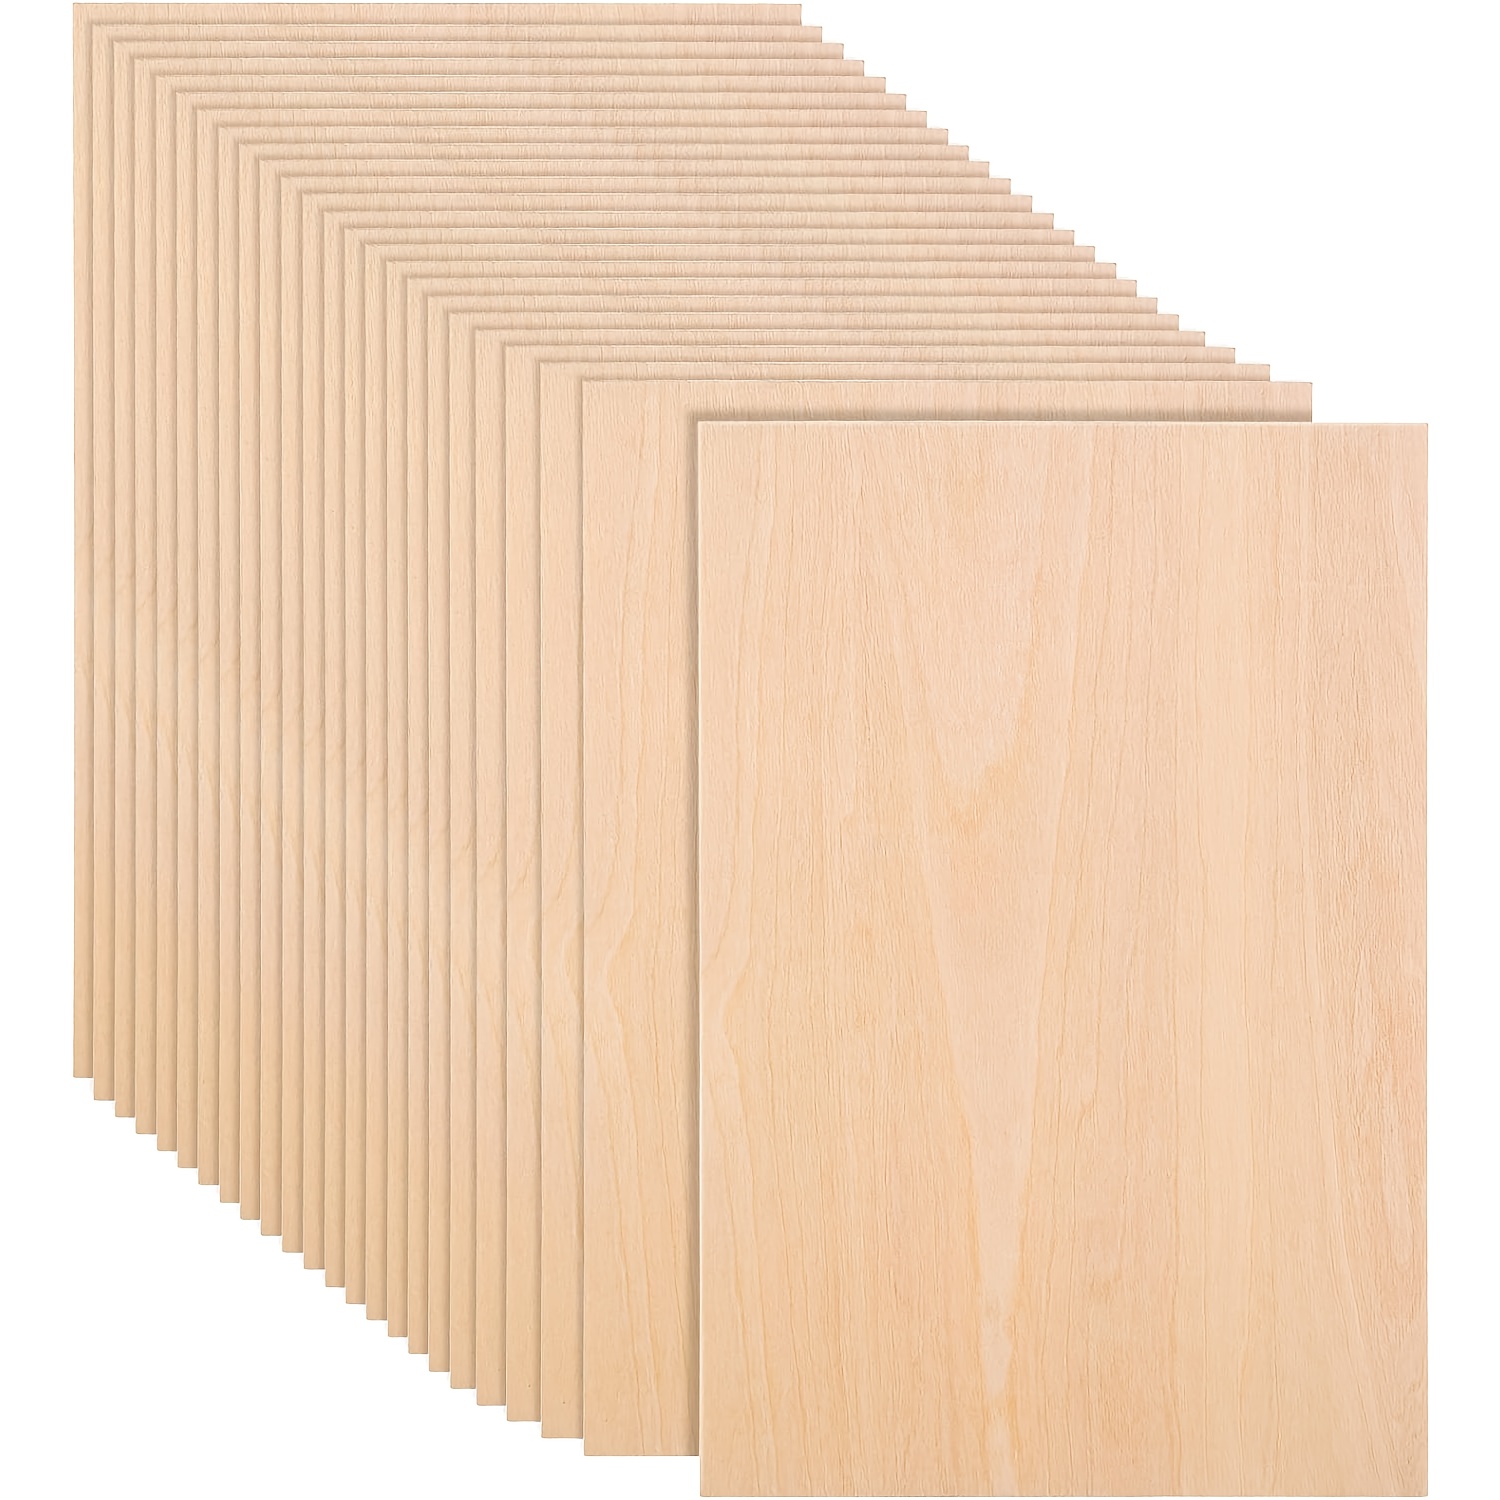 Thin Basswood Sheets, Wood Squares for Crafts 10x10, 3mm Plywood for Laser  Cutting, Wood Burning (8 Pack)